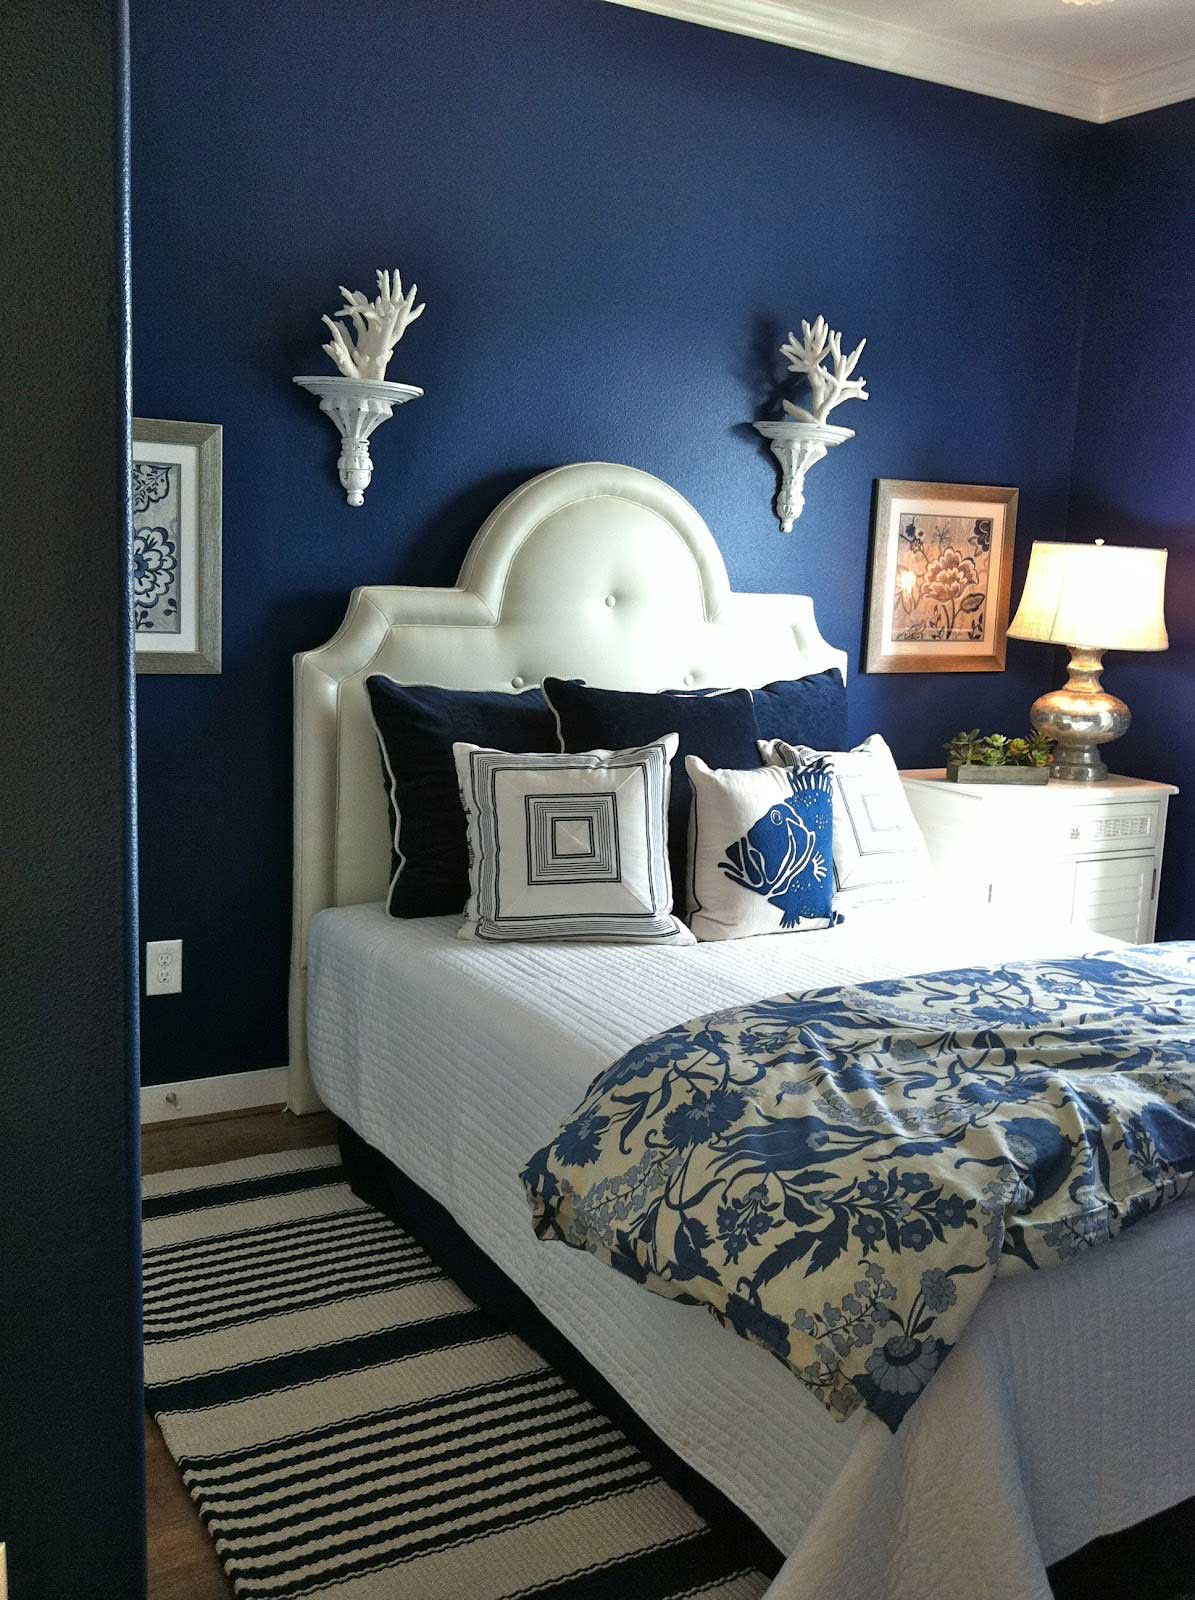 Bedroom With Blue Walls
 Moody Interior Breathtaking Bedrooms in Shades of Blue